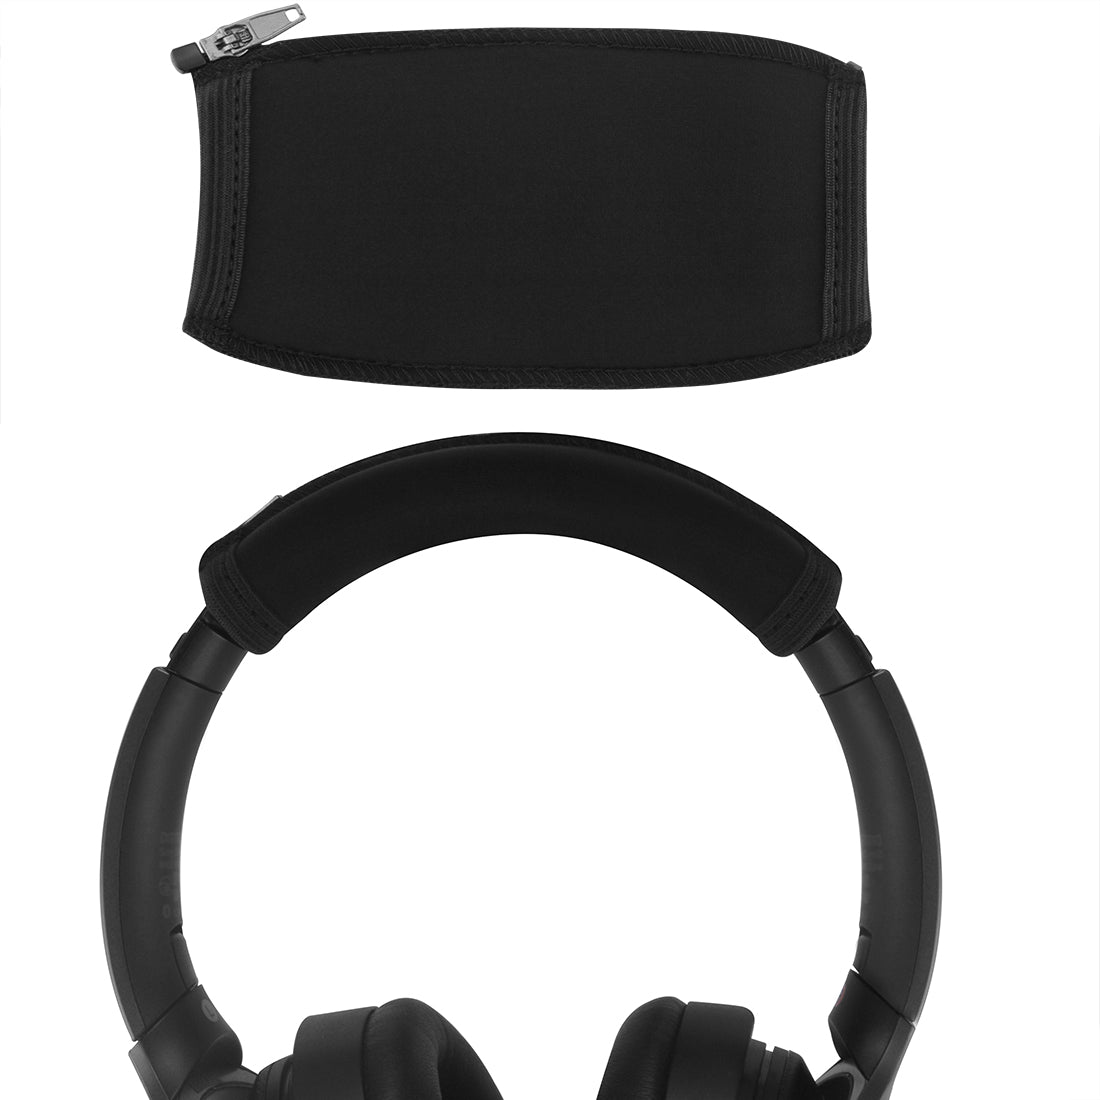 Geekria Earpad and Headband Cover Replacement for Sony WH1000XM2, MDR1